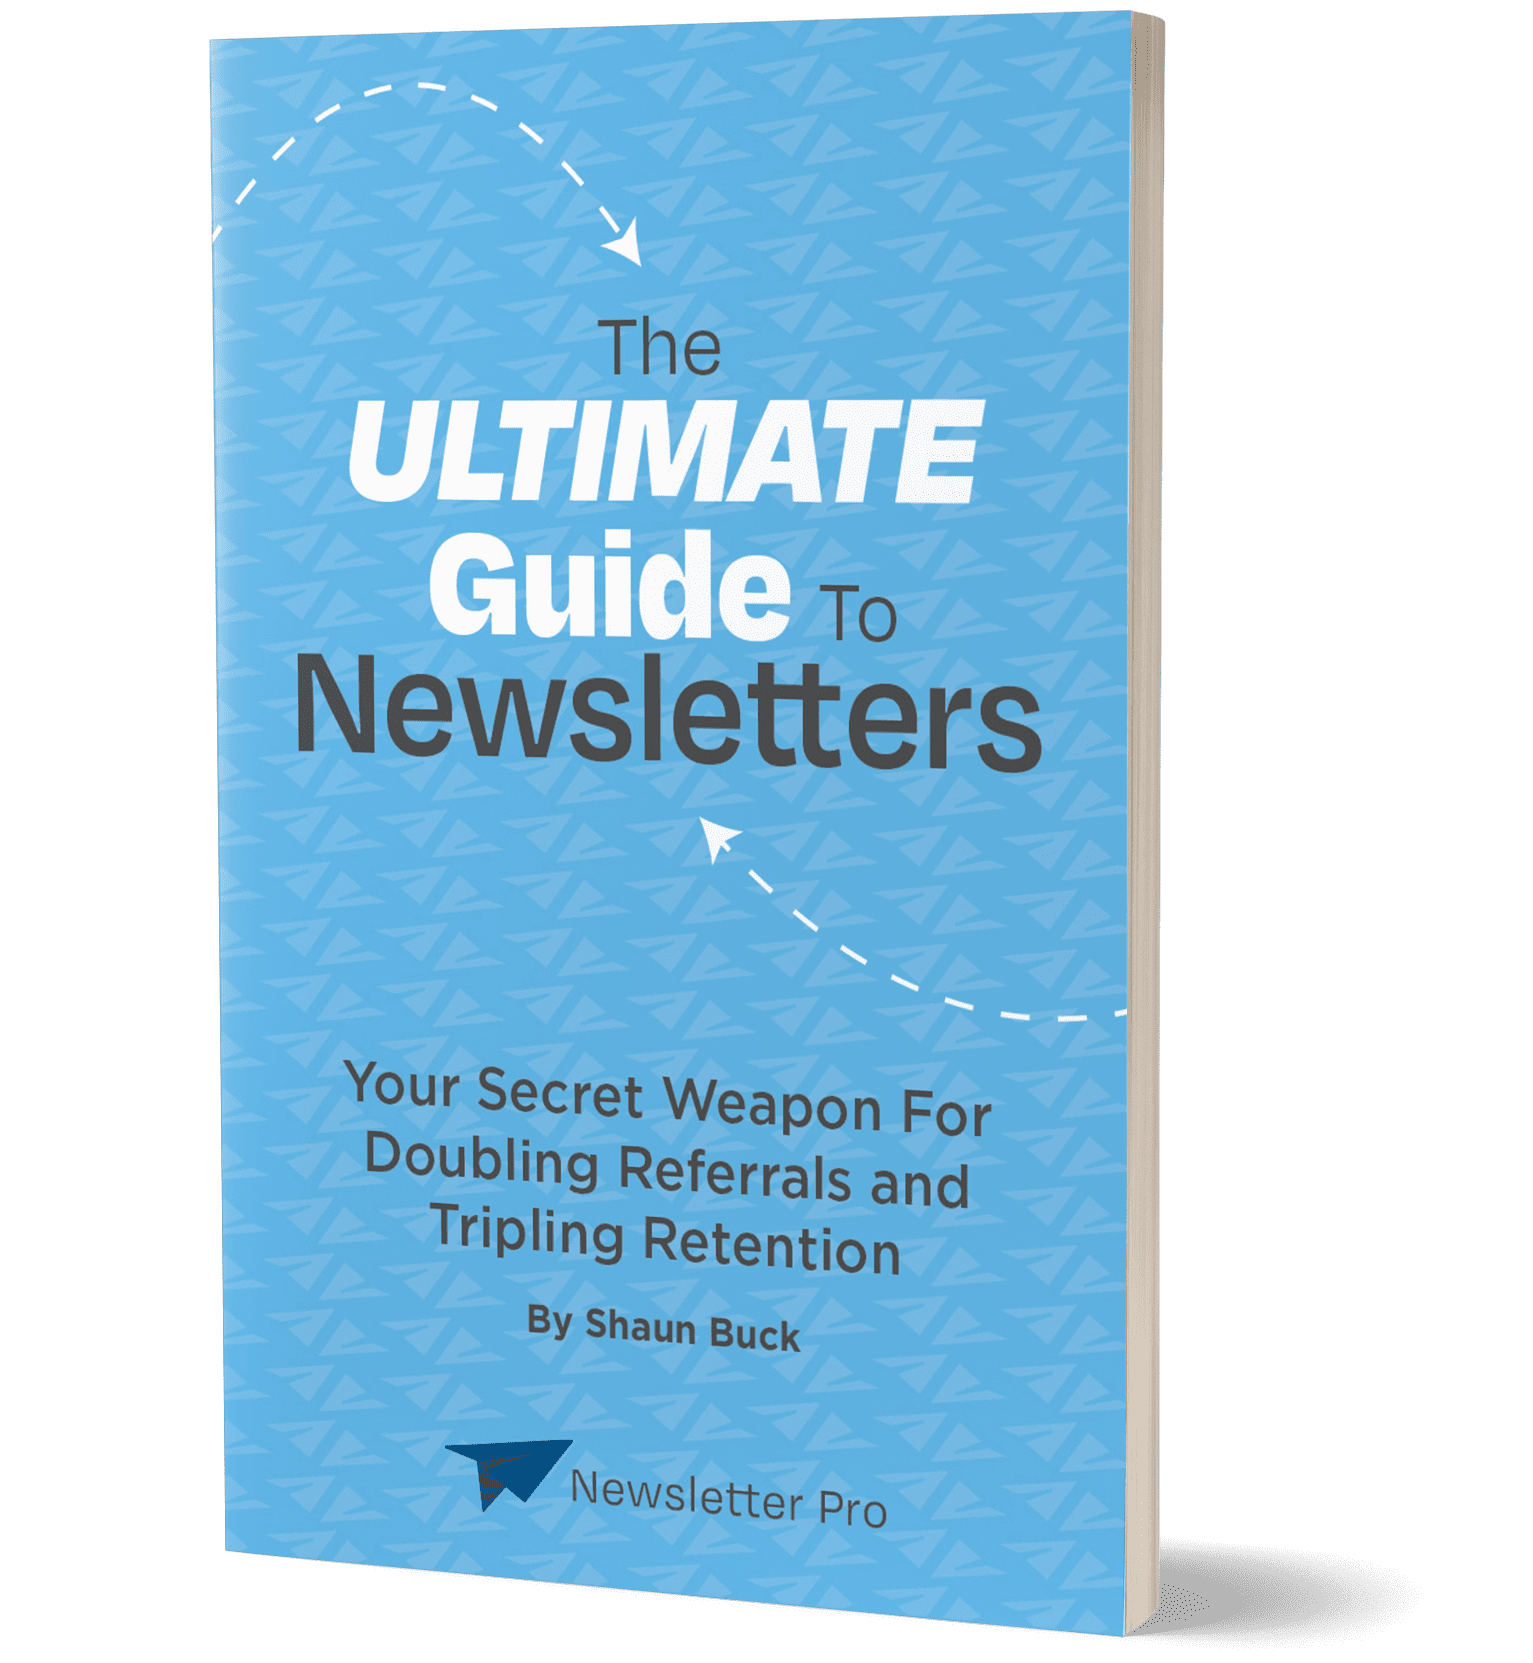 Get Your FREE Copy of The Ultimate Guide to Newsletters!